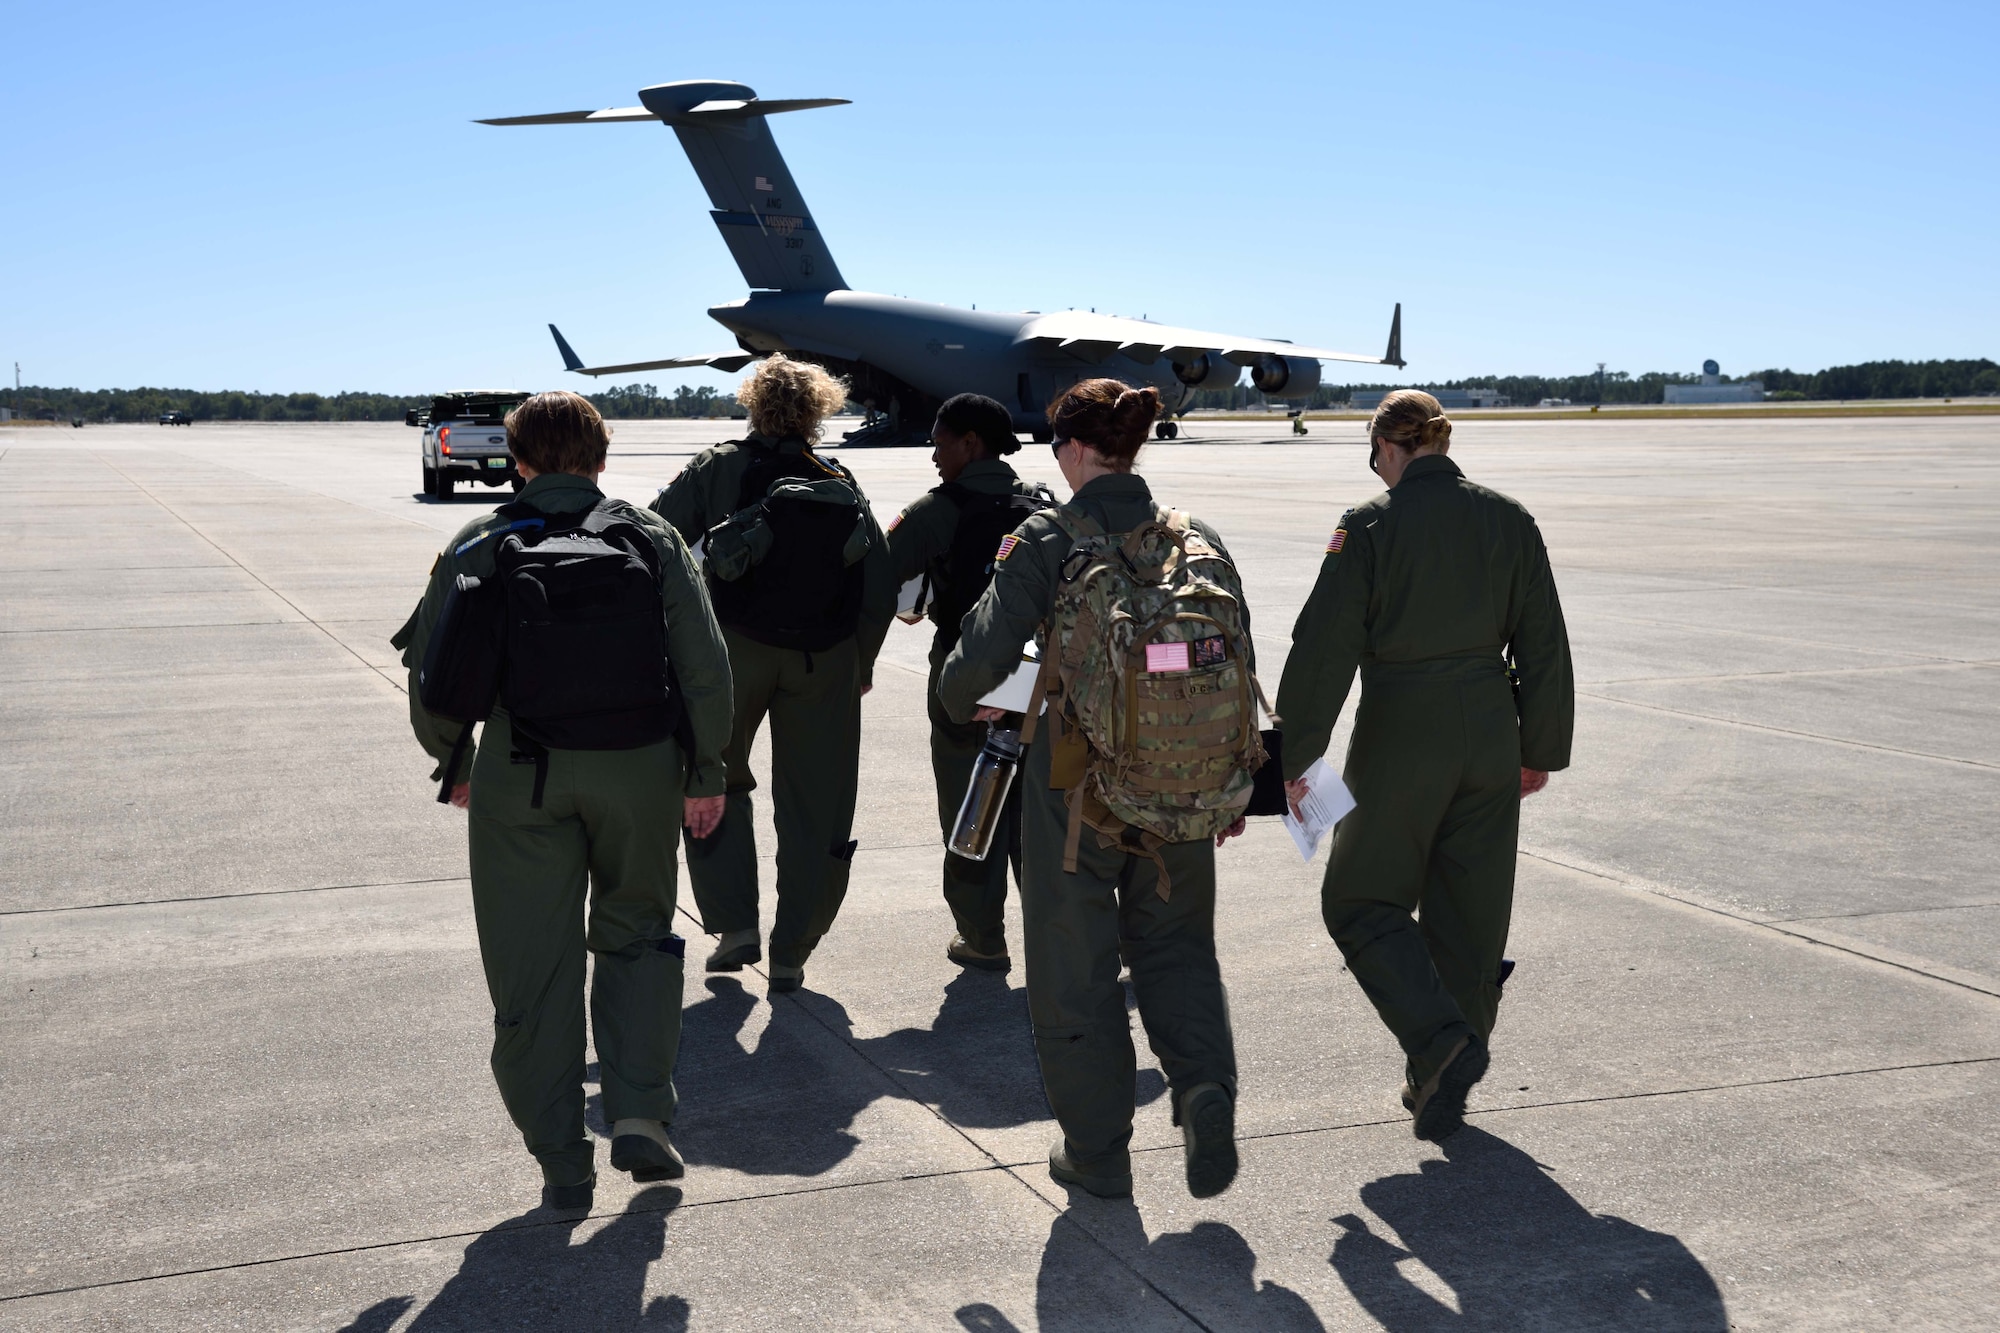 Members of the Air Force Reserve 36th Aeromedical Evacuation Squadron and other Air National Guard AE squadrons head toward a C-17 Globemaster III aircraft from the 183rd Airlift Squadron to prepare it for simulated patient transport Oct. 30, 2017, during Southern Strike 2018 at the Gulfport Combat Readiness Training Center, Mississippi. Southern Strike 2018 is a large-scale, joint multinational combat exercise that provides tactical level training for the full spectrum of conflict and emphasizes air dominance, maritime operations, maritime air support, precision engagement, close air support, command and control, personnel recovery, aeromedical evacuation, and combat medical support. (U.S. Air Force photo by Tech. Sgt. Ryan Labadens)